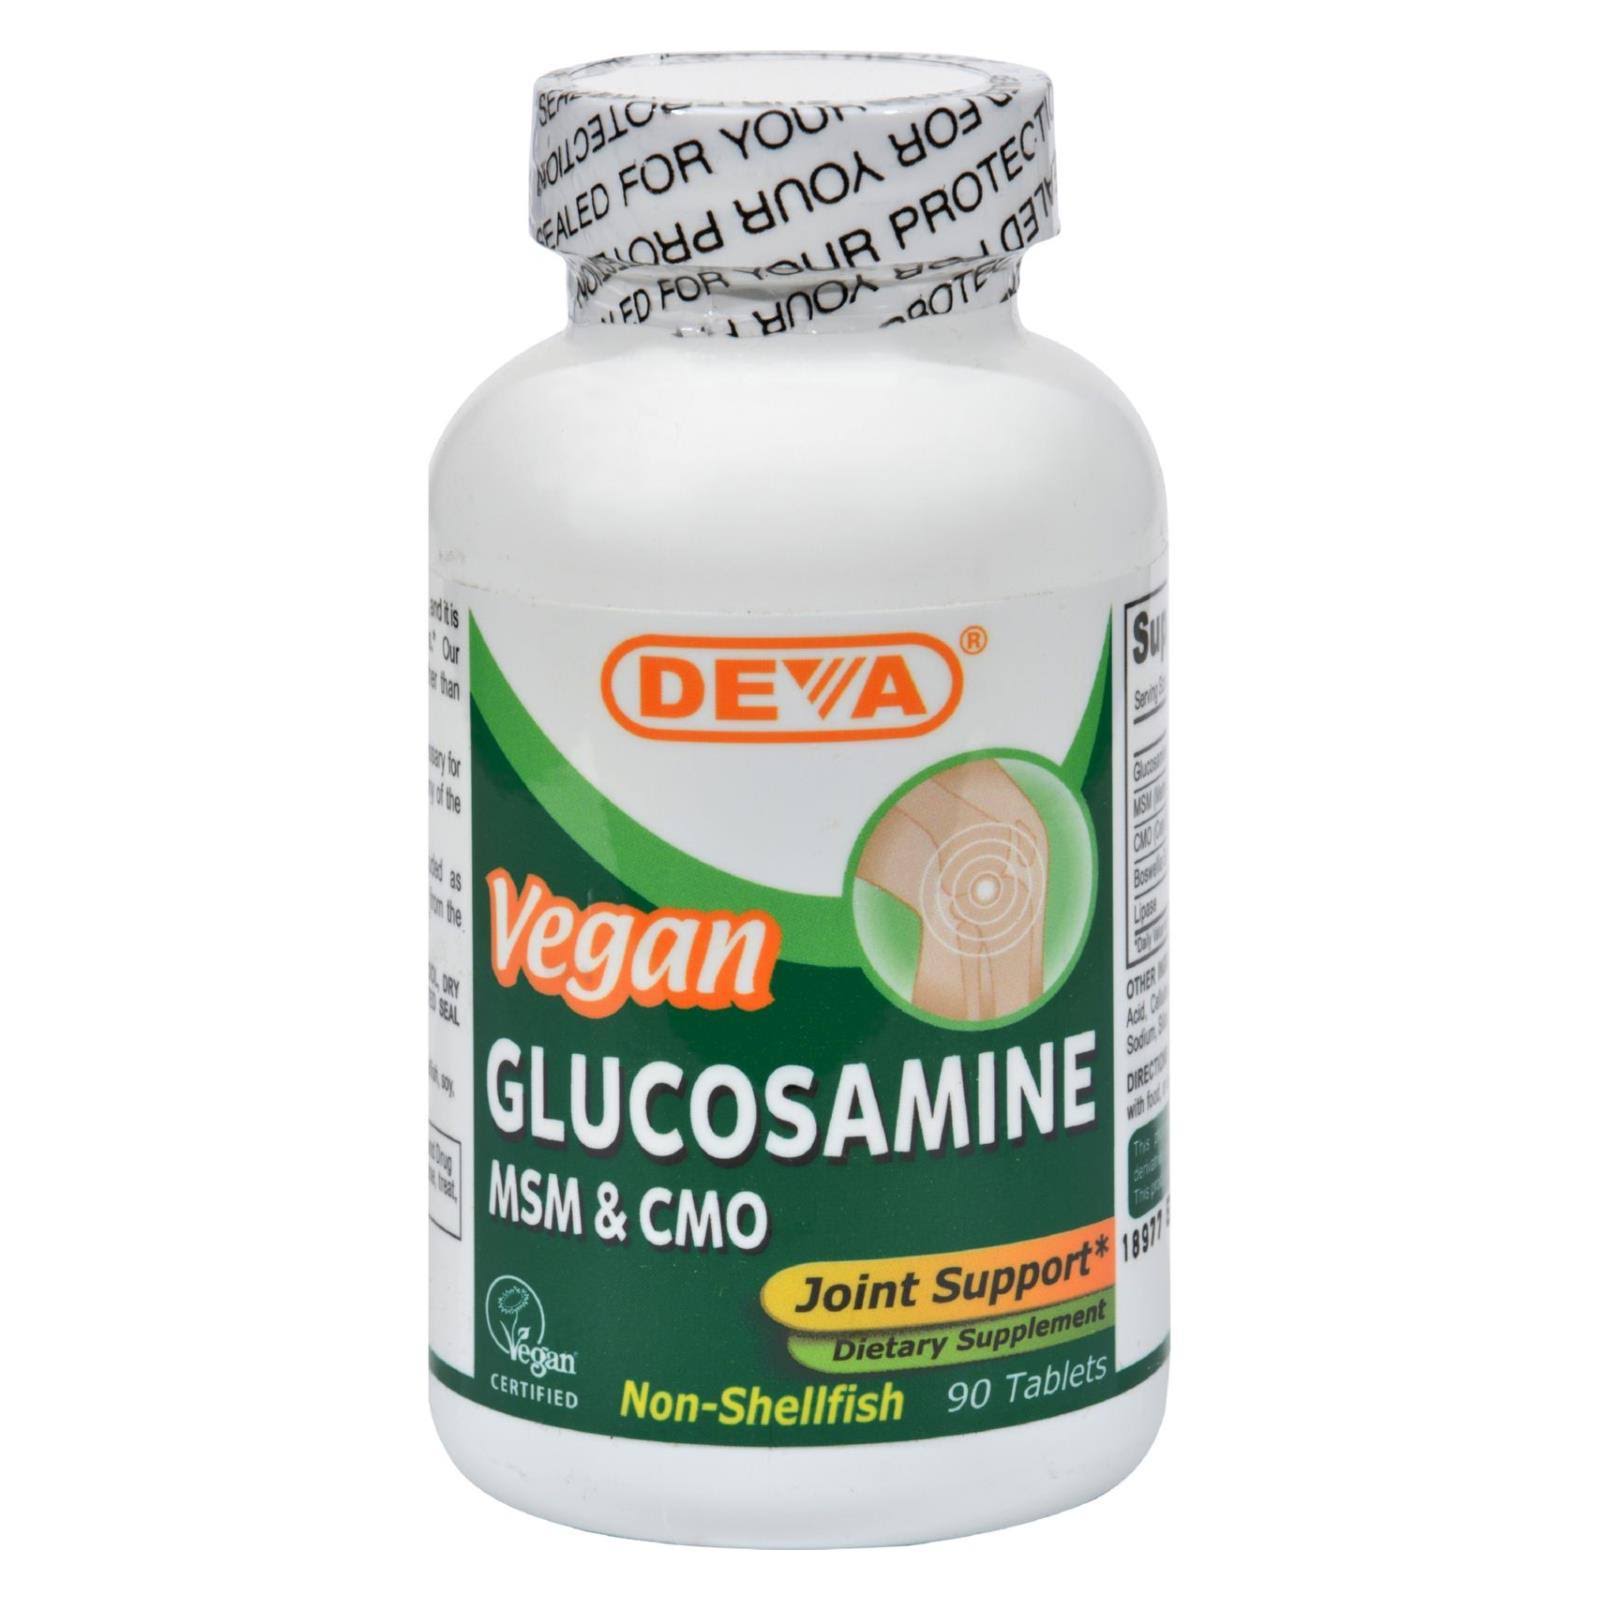 Deva Vegan Glucosamine MSM and CMO Joint Support Supplements - 90ct